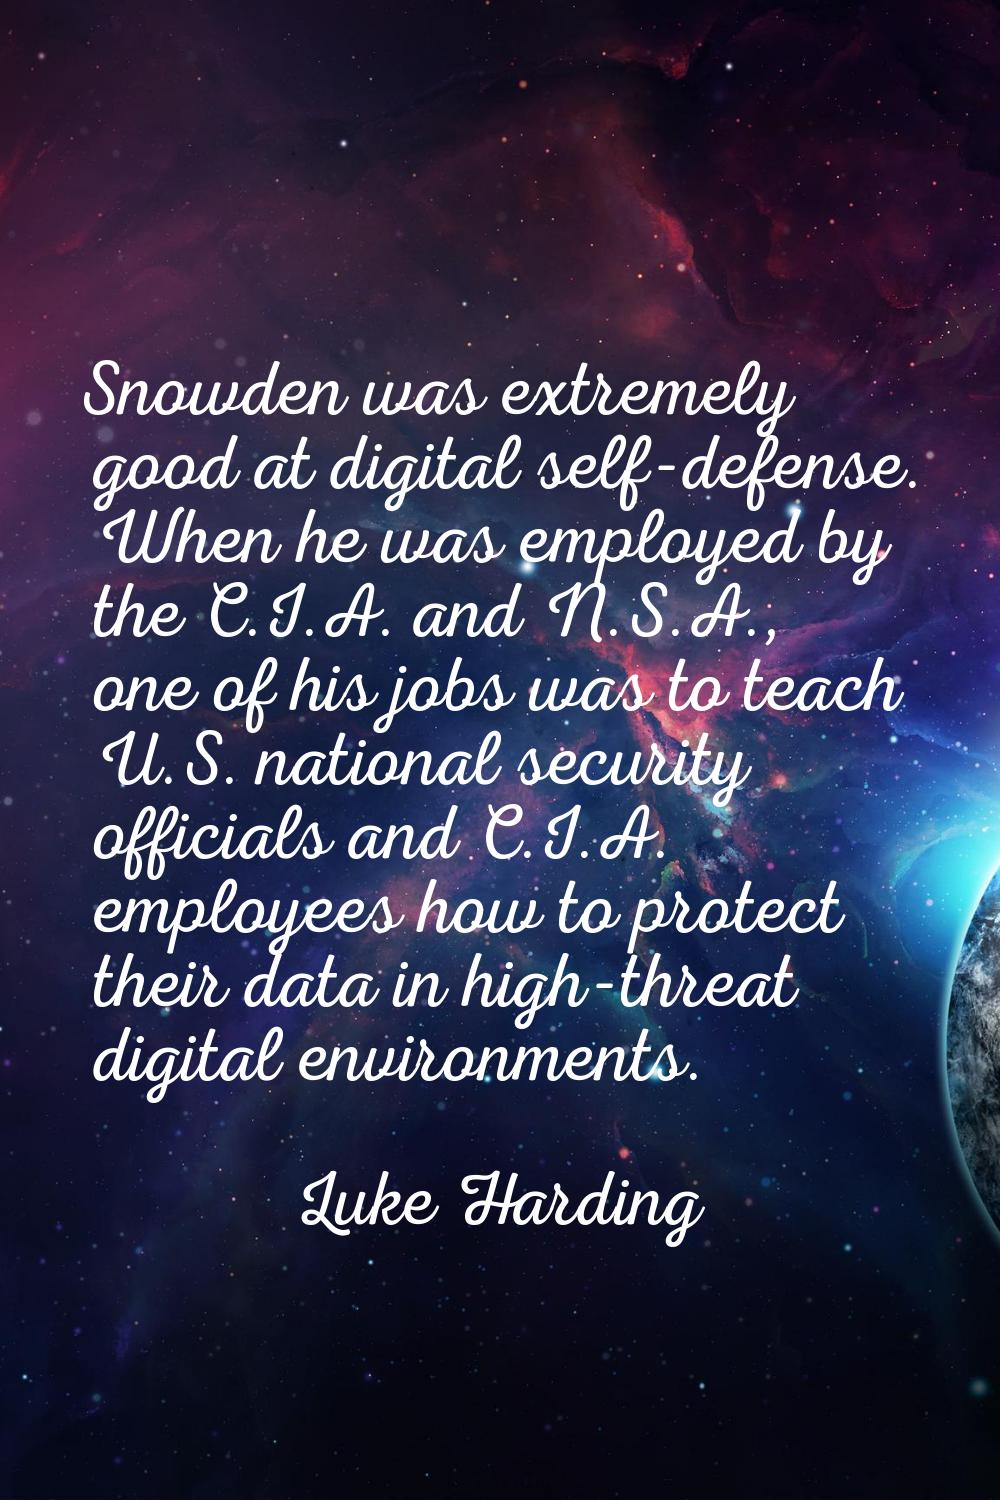 Snowden was extremely good at digital self-defense. When he was employed by the C.I.A. and N.S.A., 